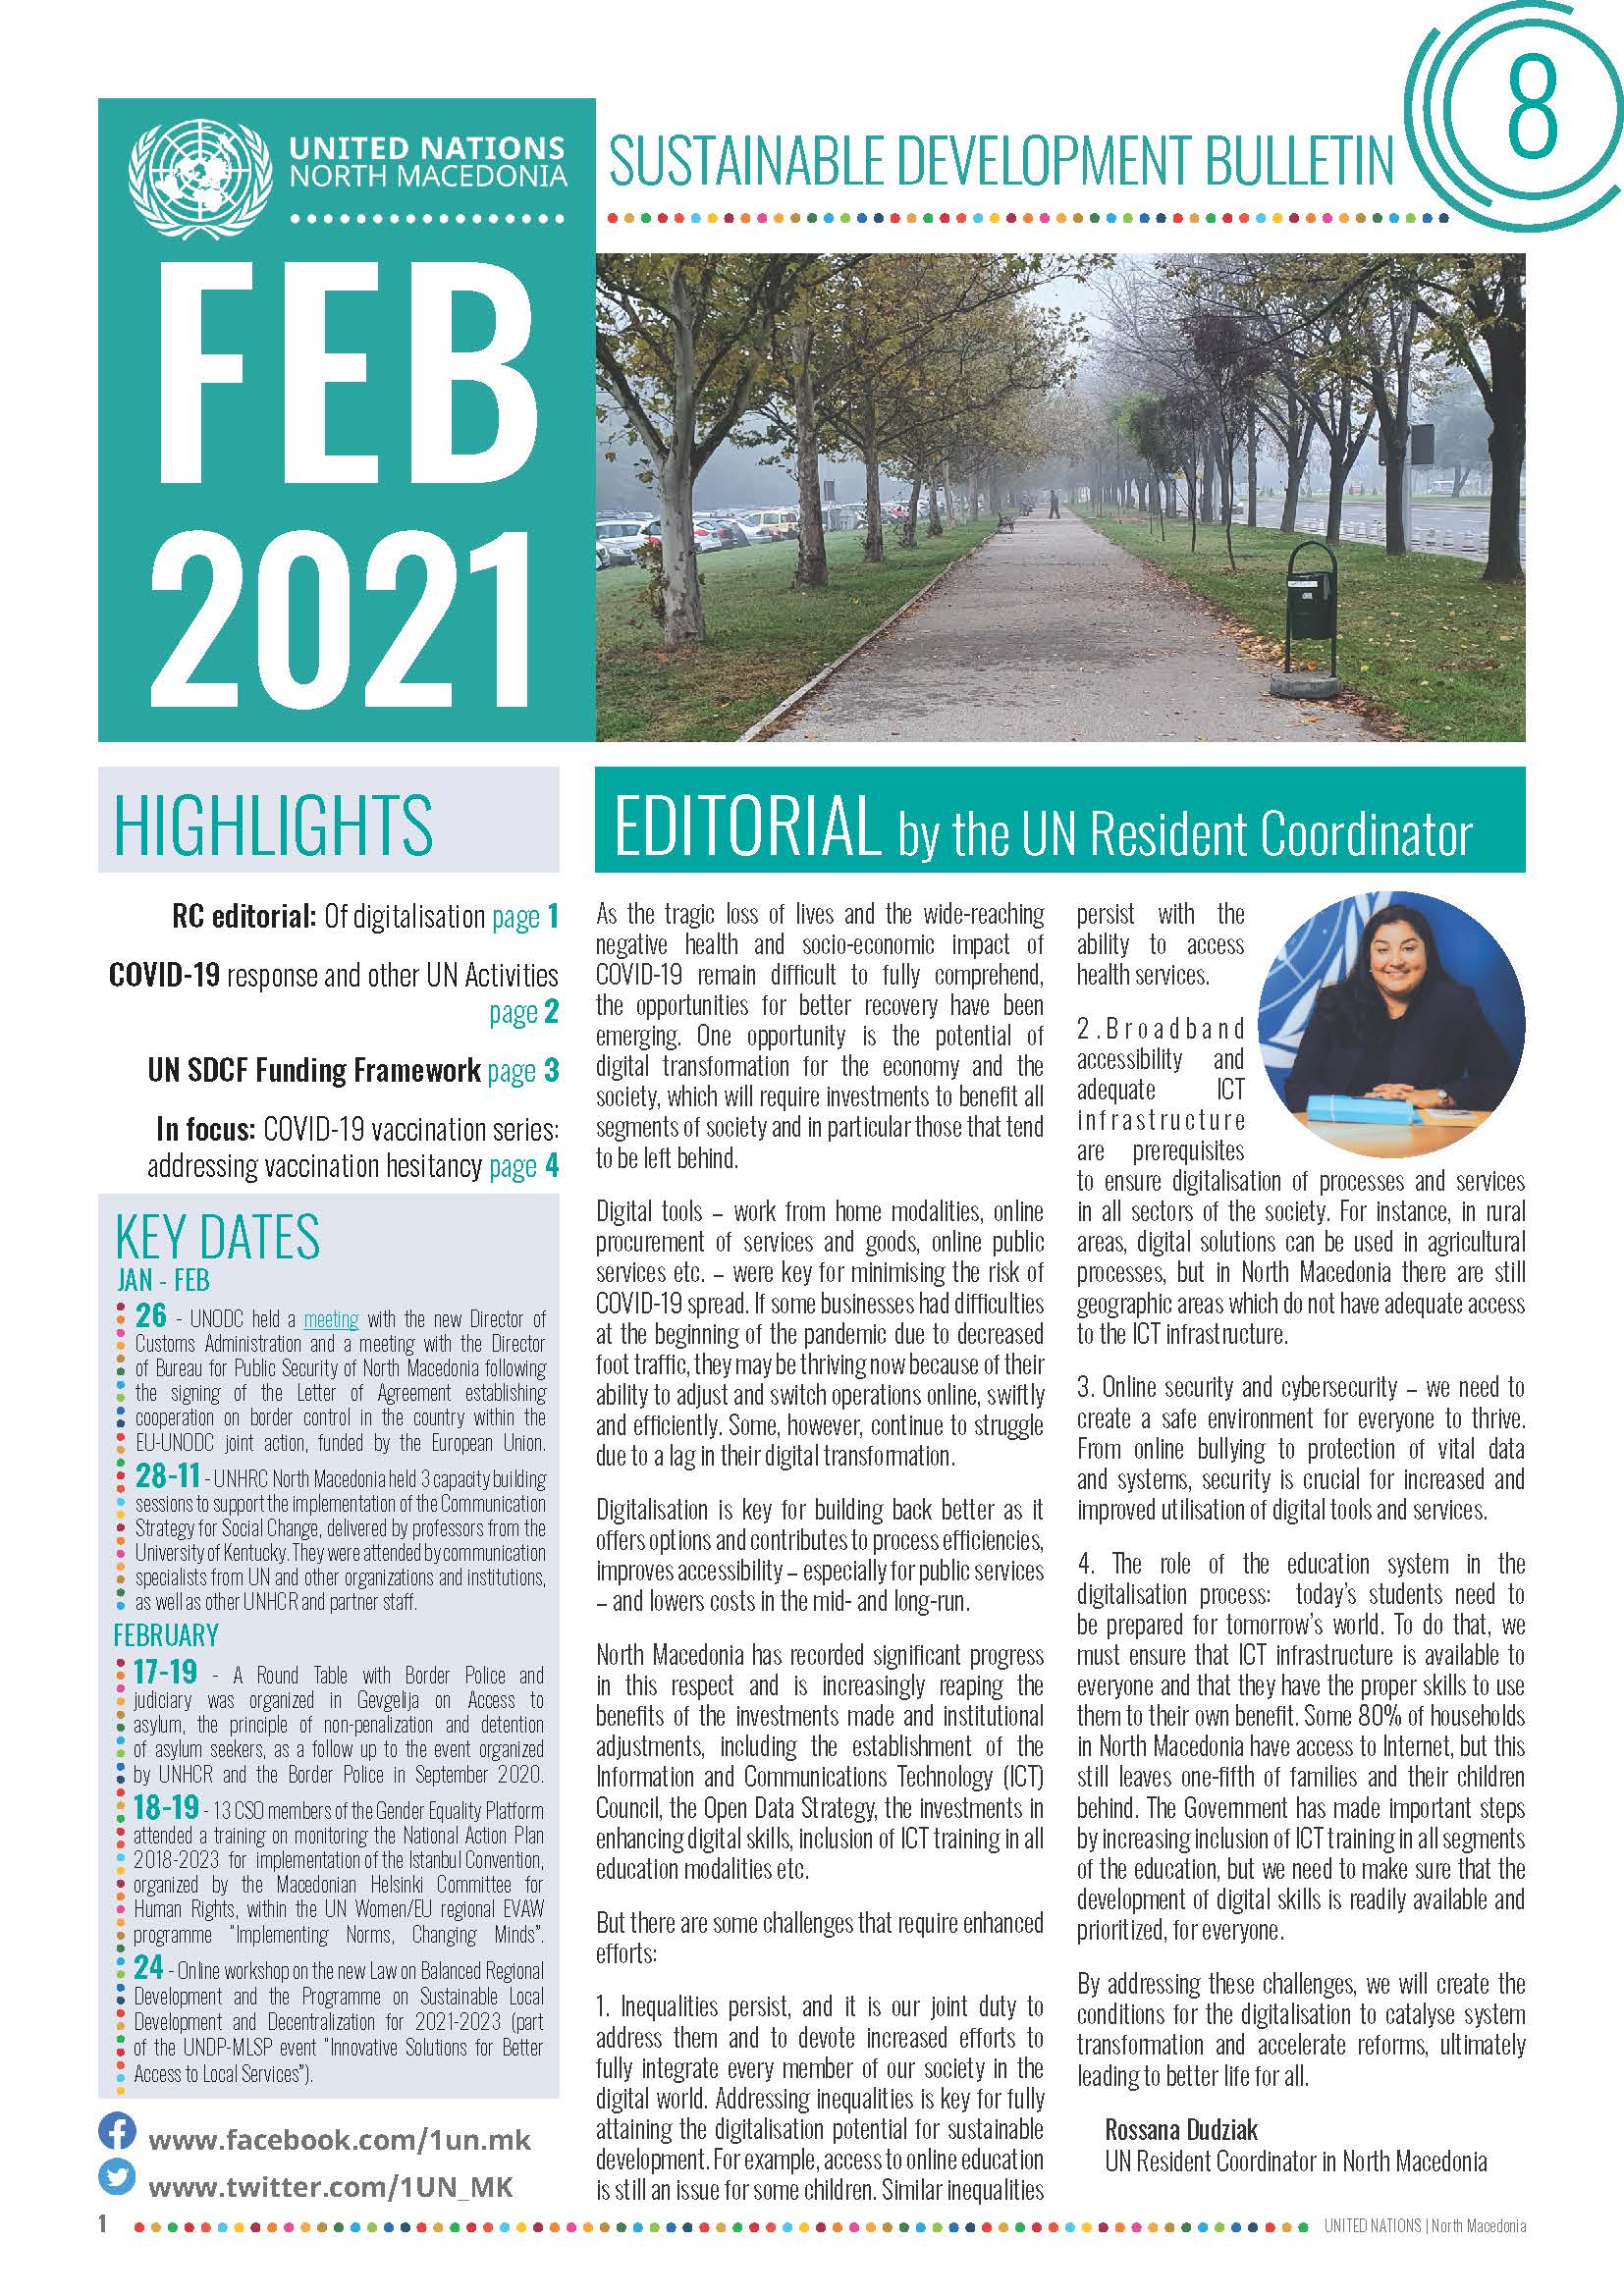 Front page February bulletin